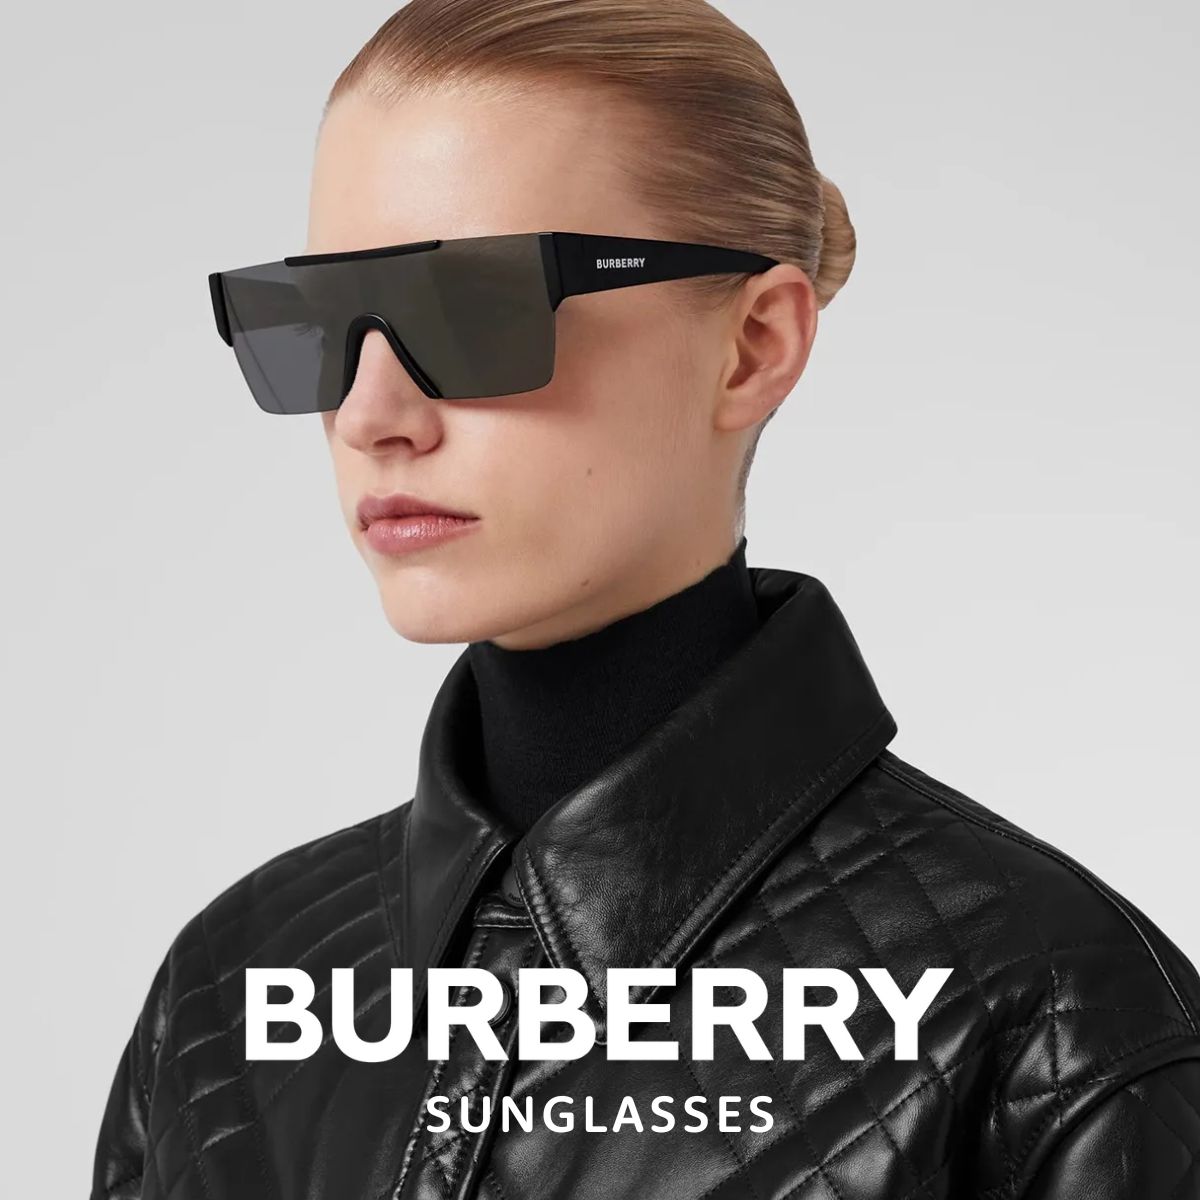 "Discover our stylish collection of Burberry sunglasses for both men and women. With a guaranteed comfortable fit and 100% UV protection, these sunglasses are perfect for any face shape and size. Shop now and elevate your style with Burberry."